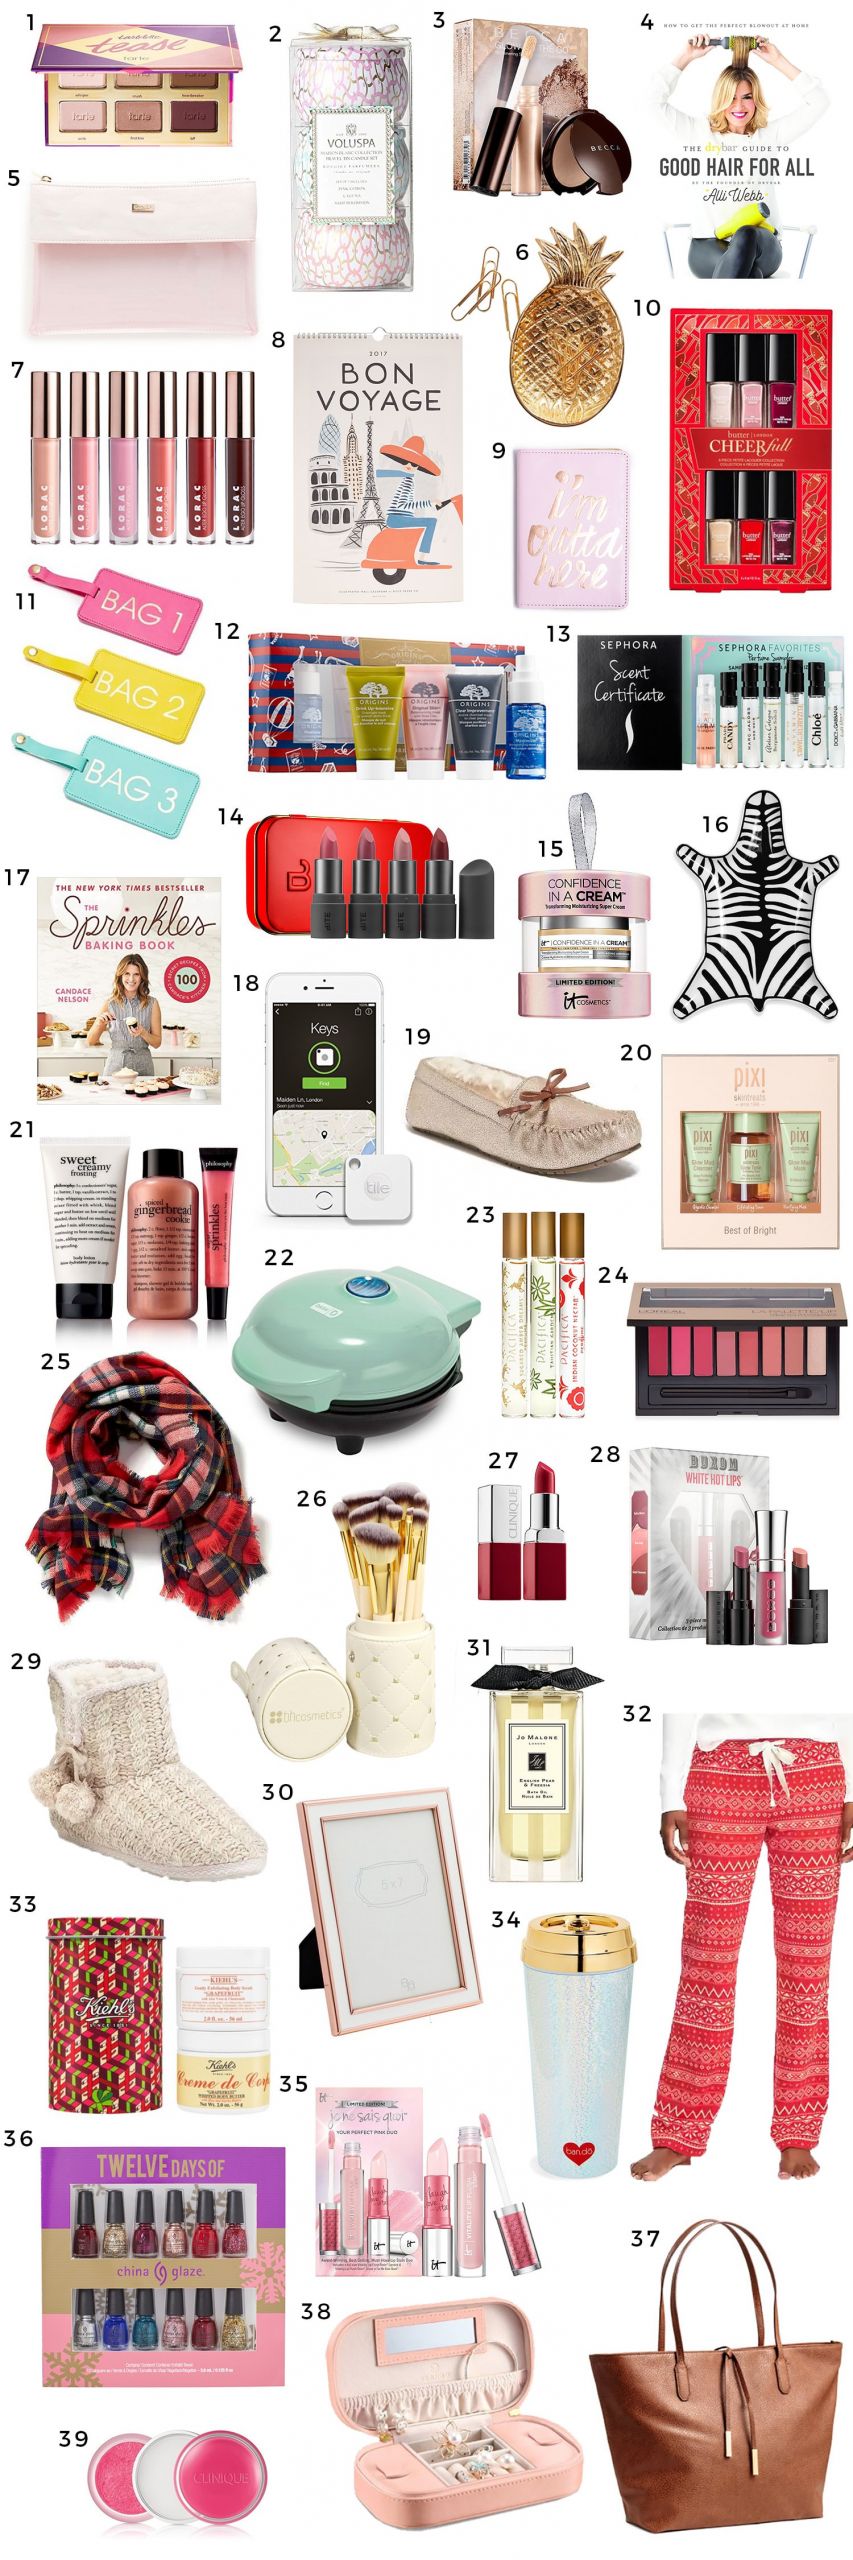 Holiday Gift Ideas For Woman
 The Best Christmas Gift Ideas for Women under $25